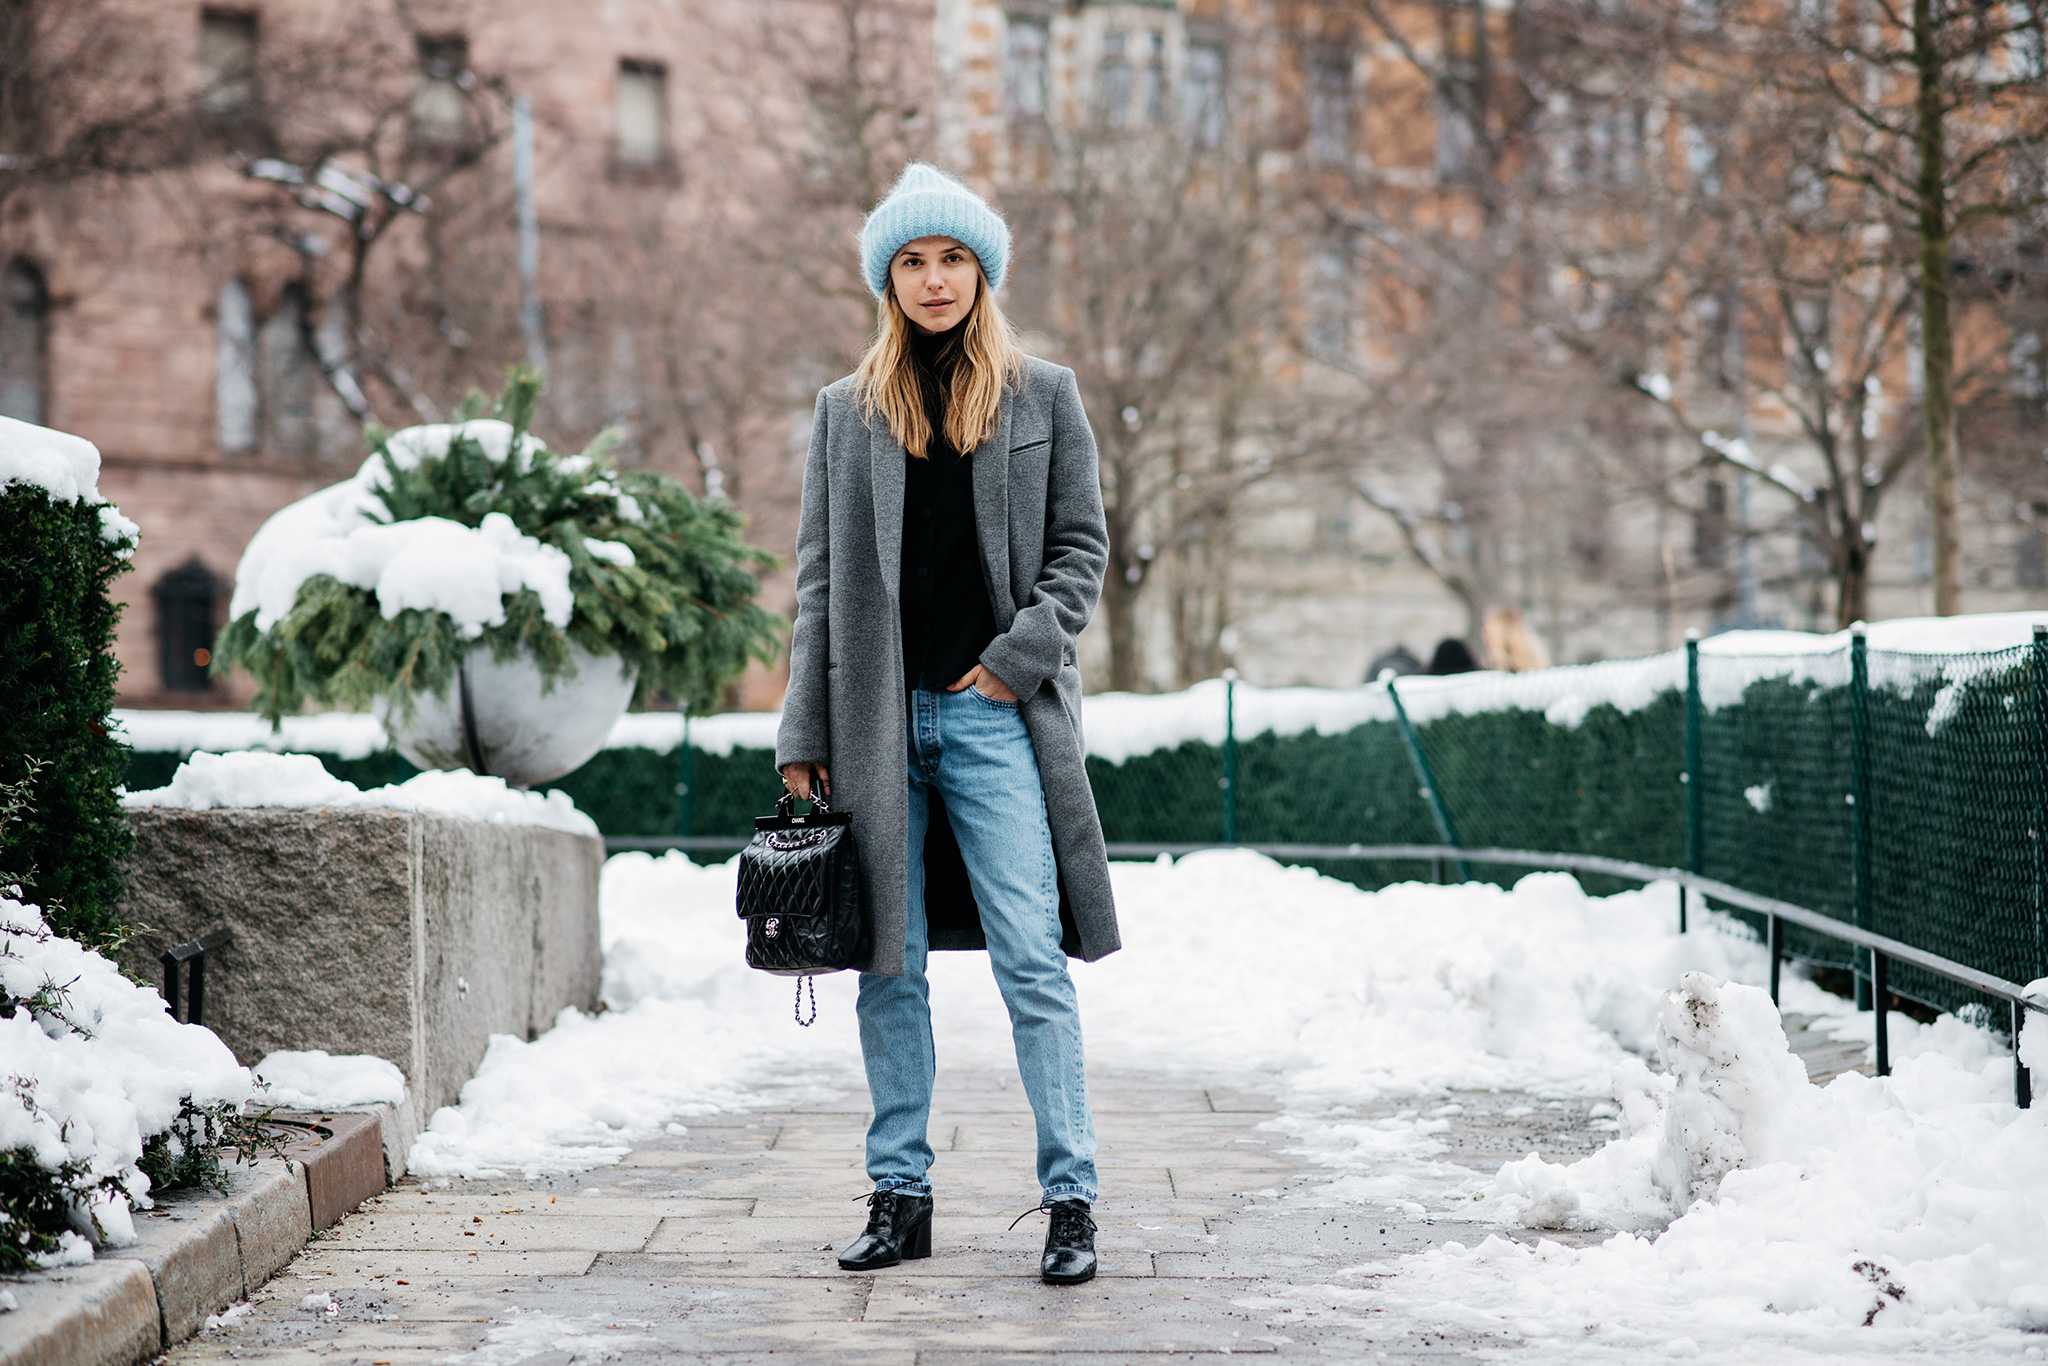 Women's Winter Fashion Ideas That Will Have You Looking Fresh - Society19